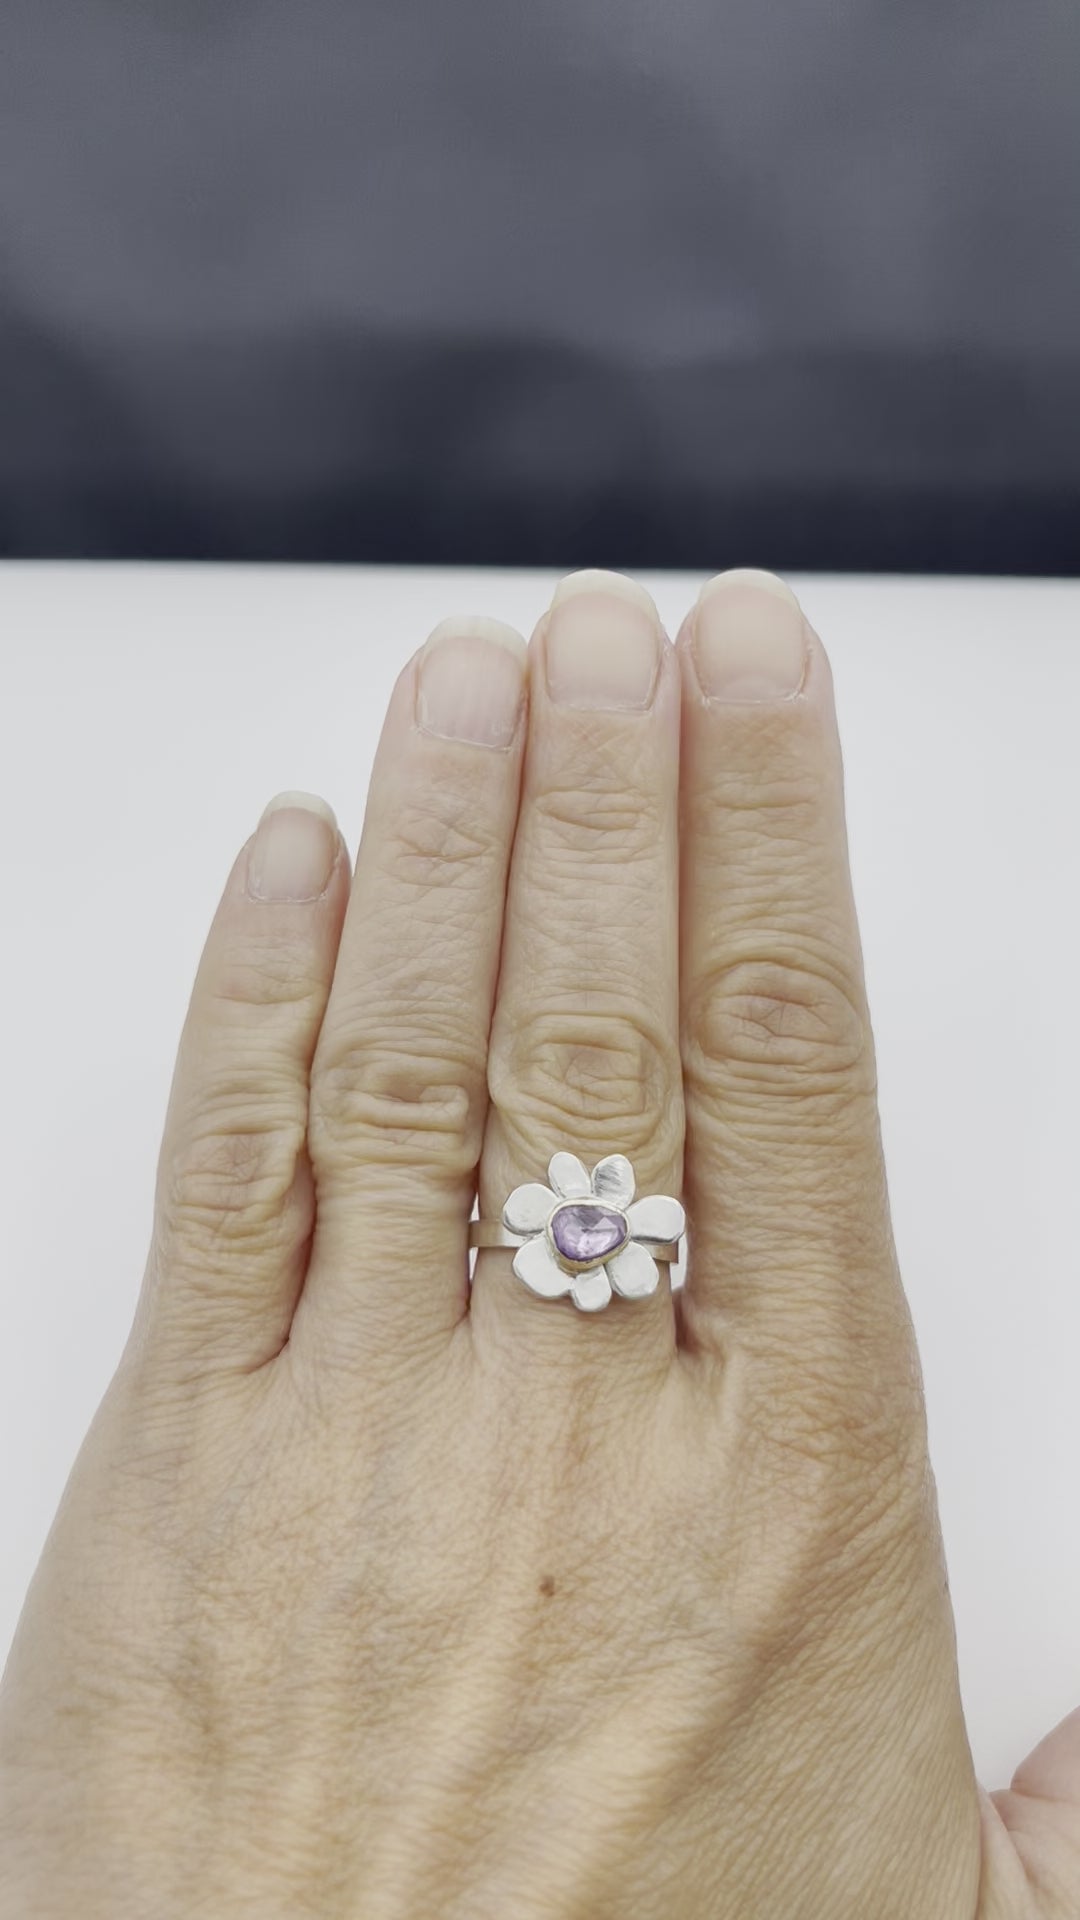 Pink Sapphire Ring, Silver Sapphire Flower Ring, One of a Kind